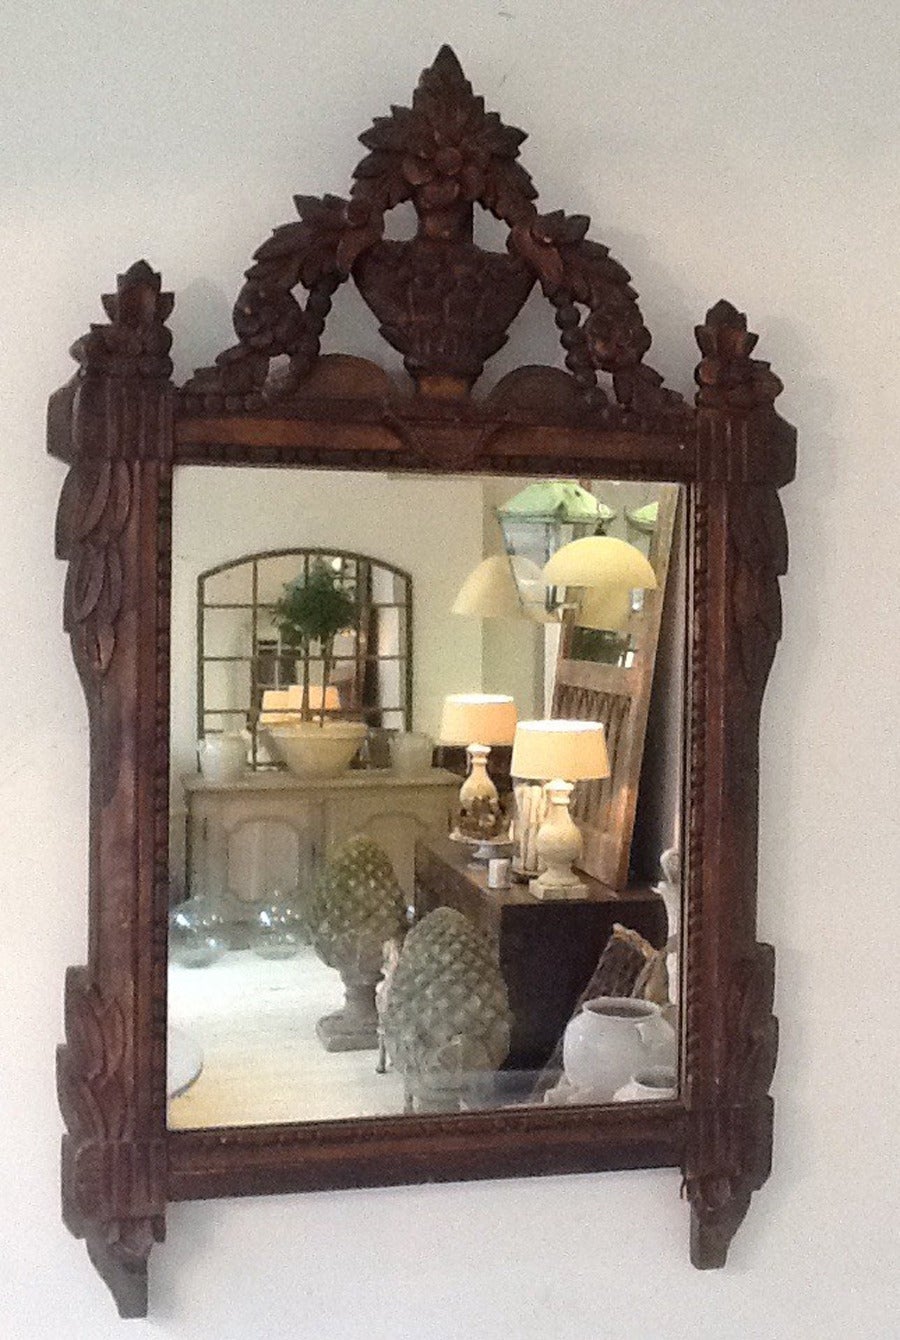 A very handsome 19th century French mirror with gilt wood carving on a wooden frame. The mirror is crested with an urn and foliate and the top carved layer is gilded and highlighted with a red clay pigment that is now exposed as the leafing has worn